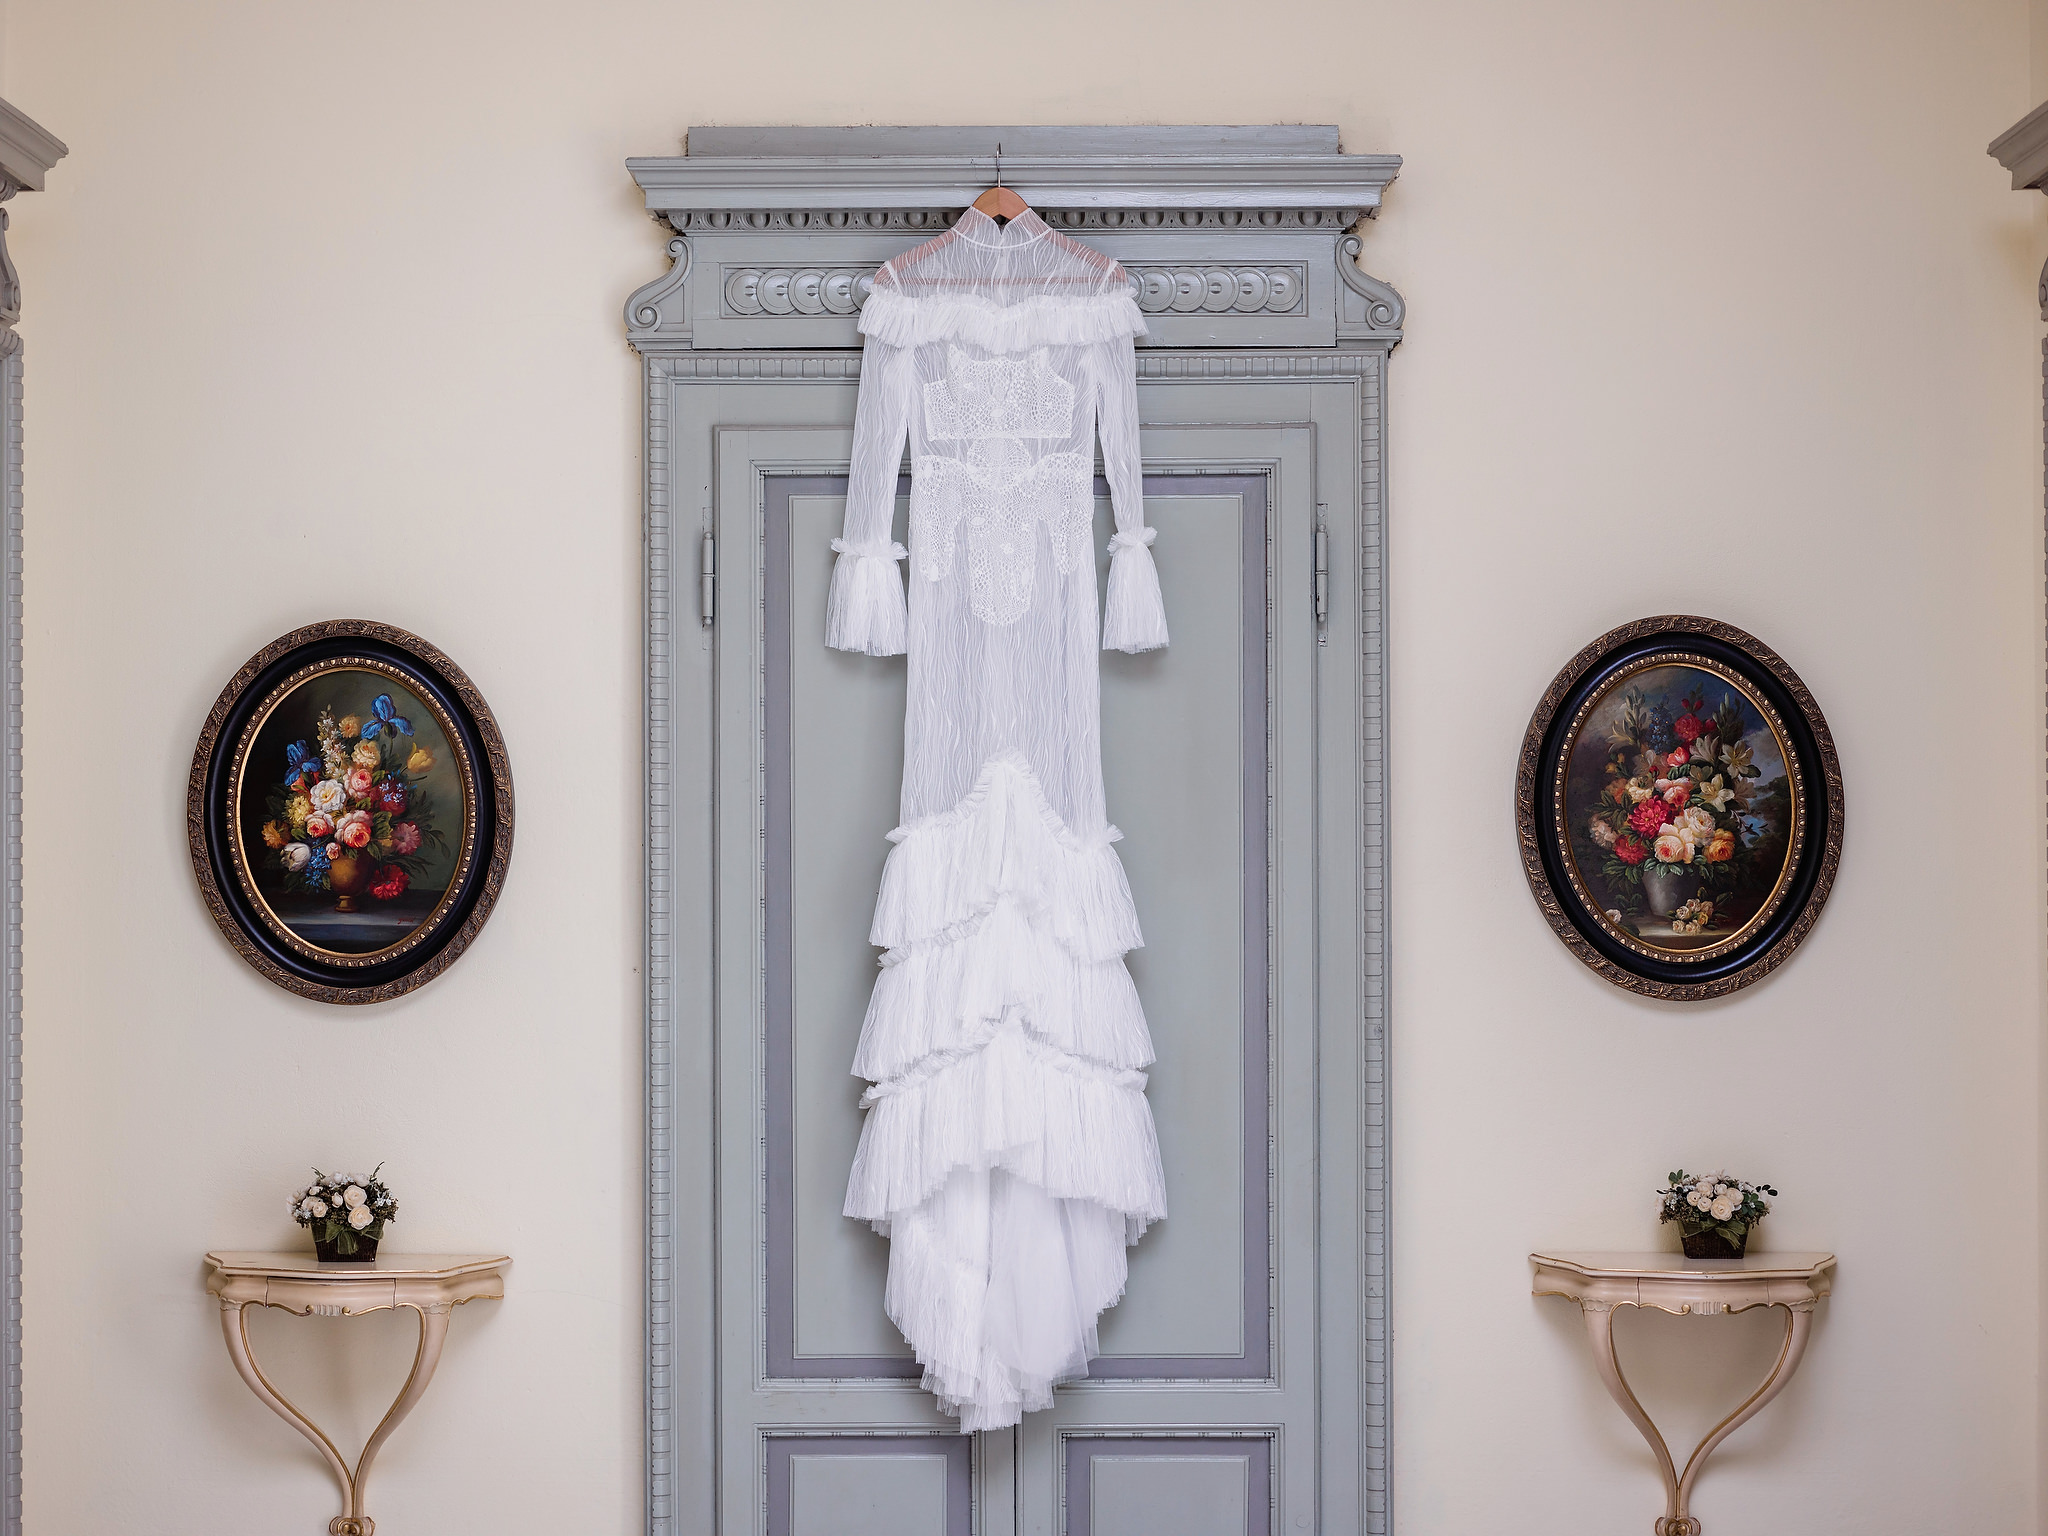 A lace wedding dress hangs from a wardrobe in Italy